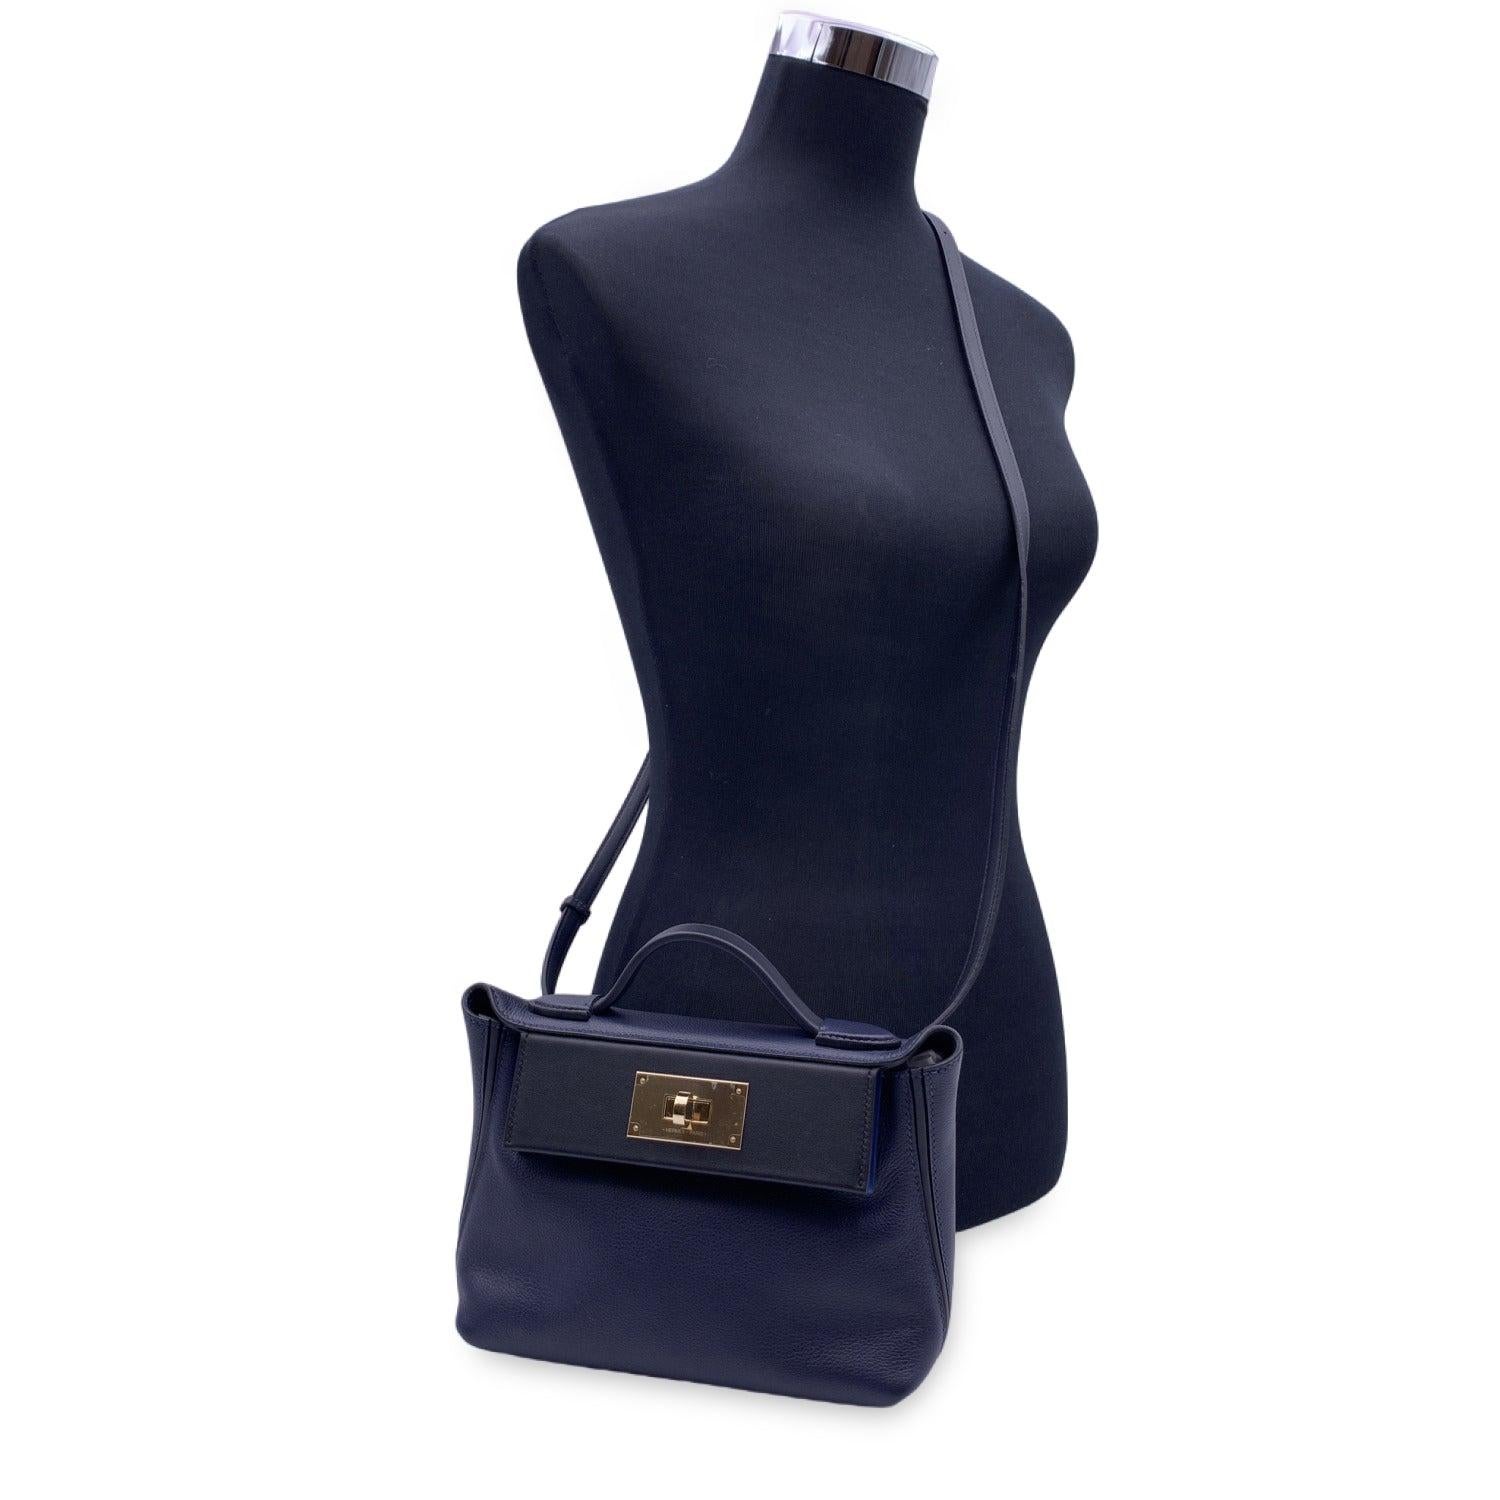 This beautiful Bag will come with a Certificate of Authenticity provided by Entrupy. The certificate will be provided at no further cost. Hermes '24/24' handbag in midnight blue, bright blue and black color. Calfskin leather. It features a top carry